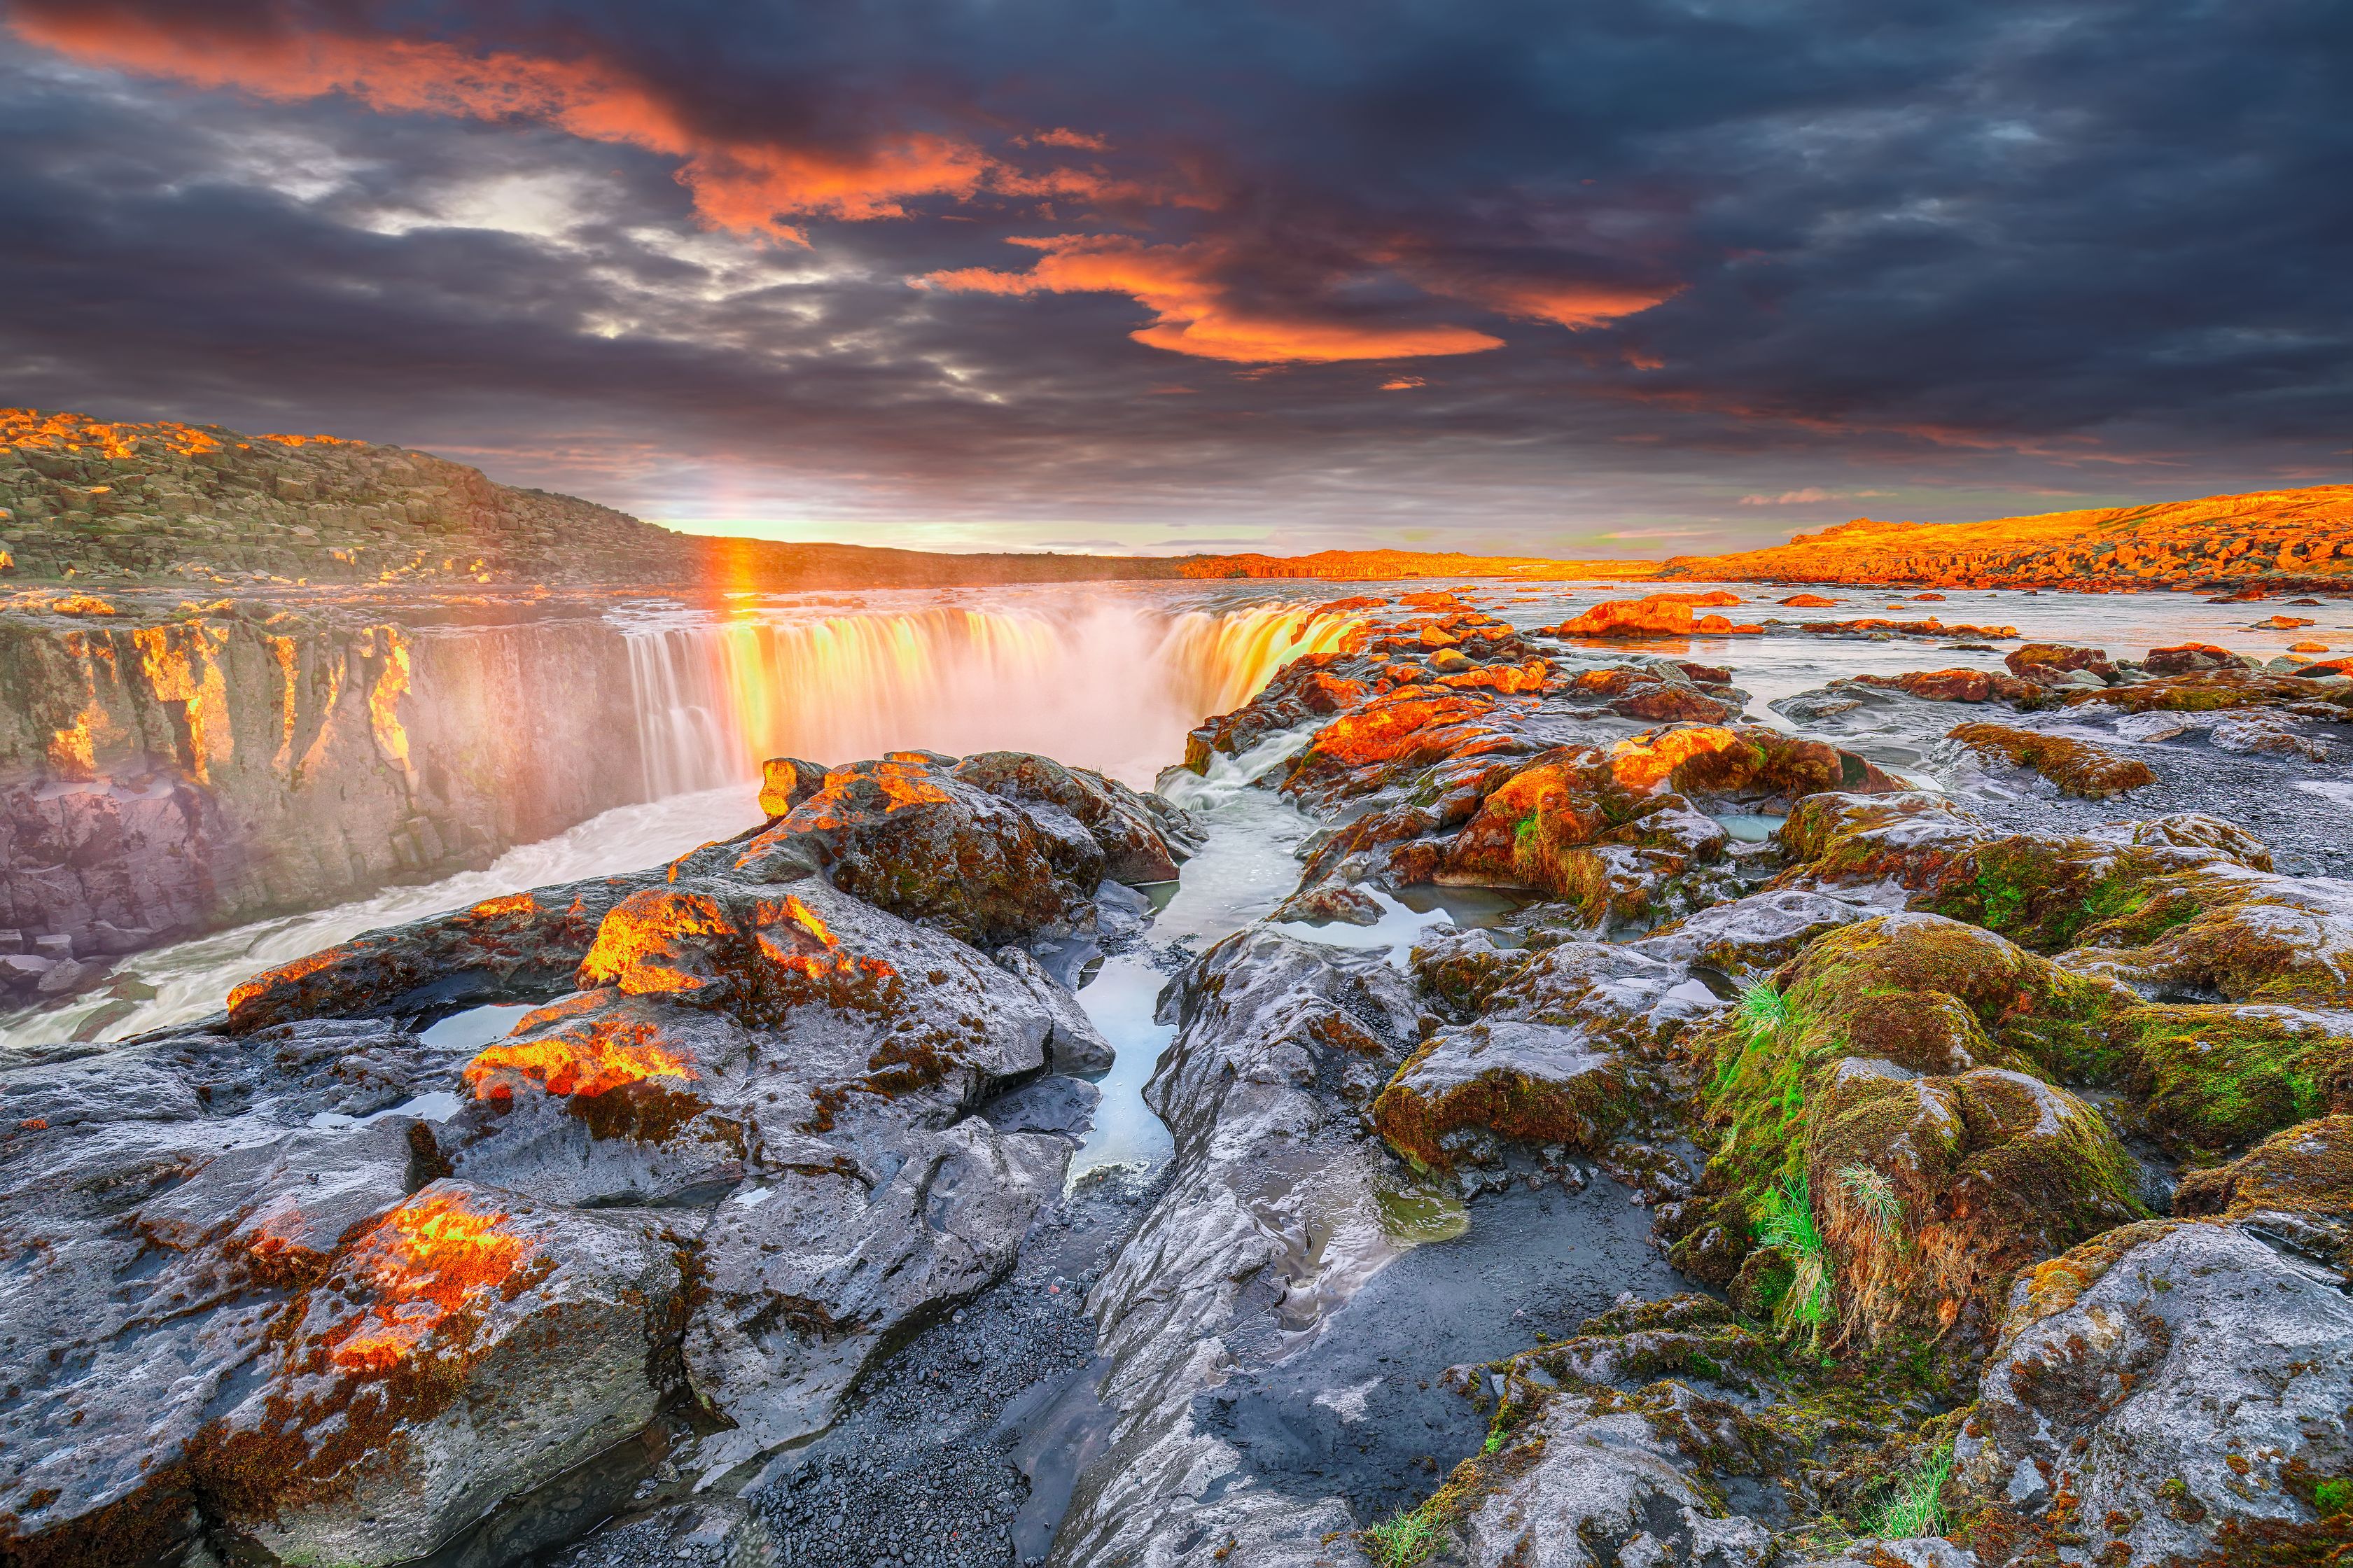 Dramatic sunset over Selfoss waterfall in Iceland